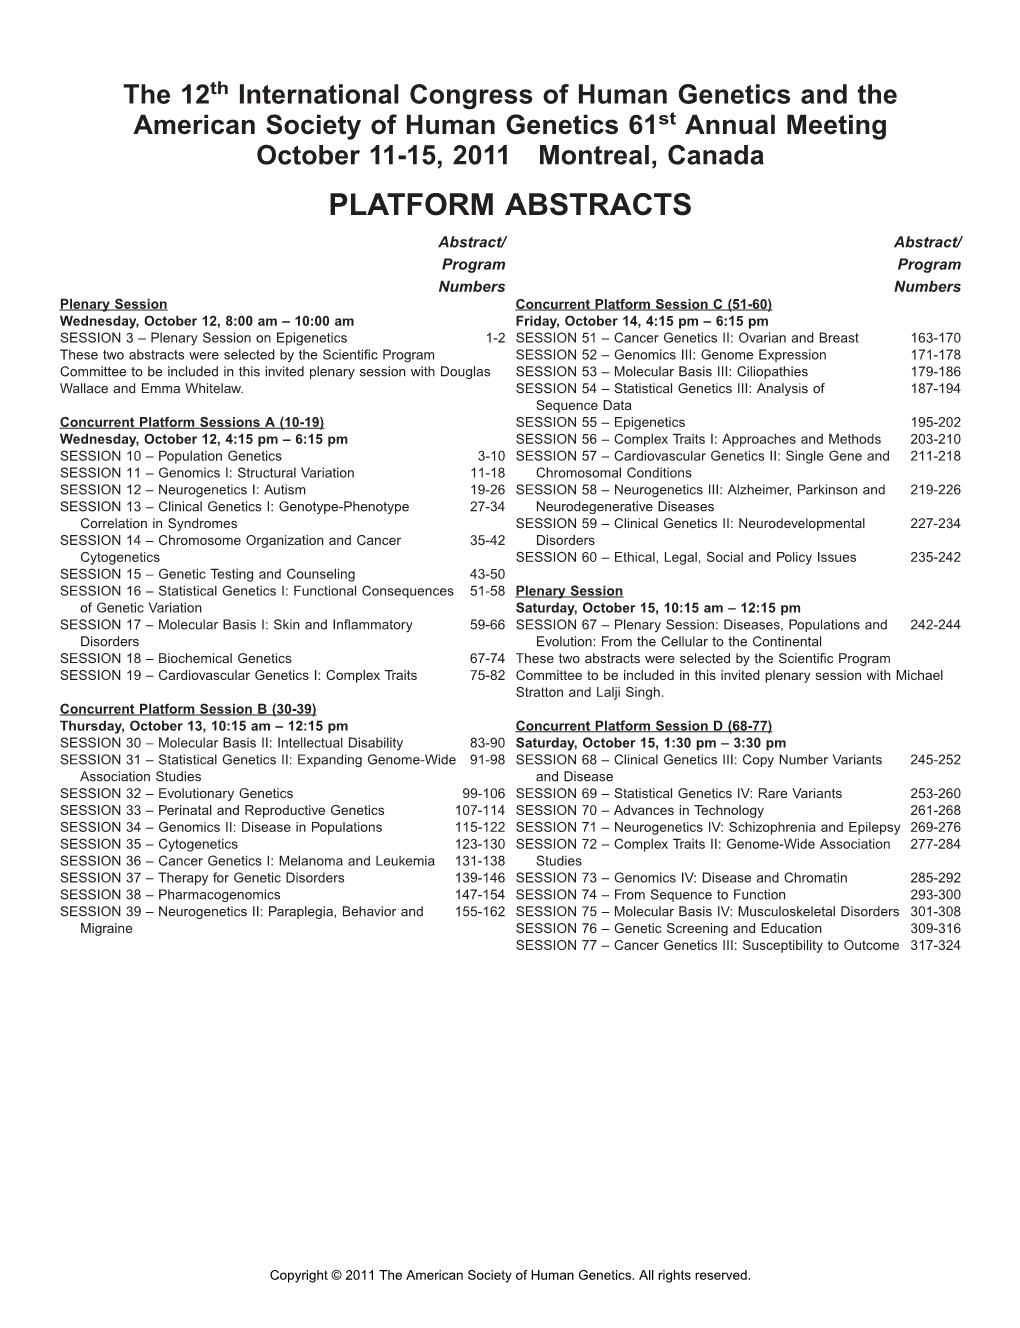 Platform Abstracts